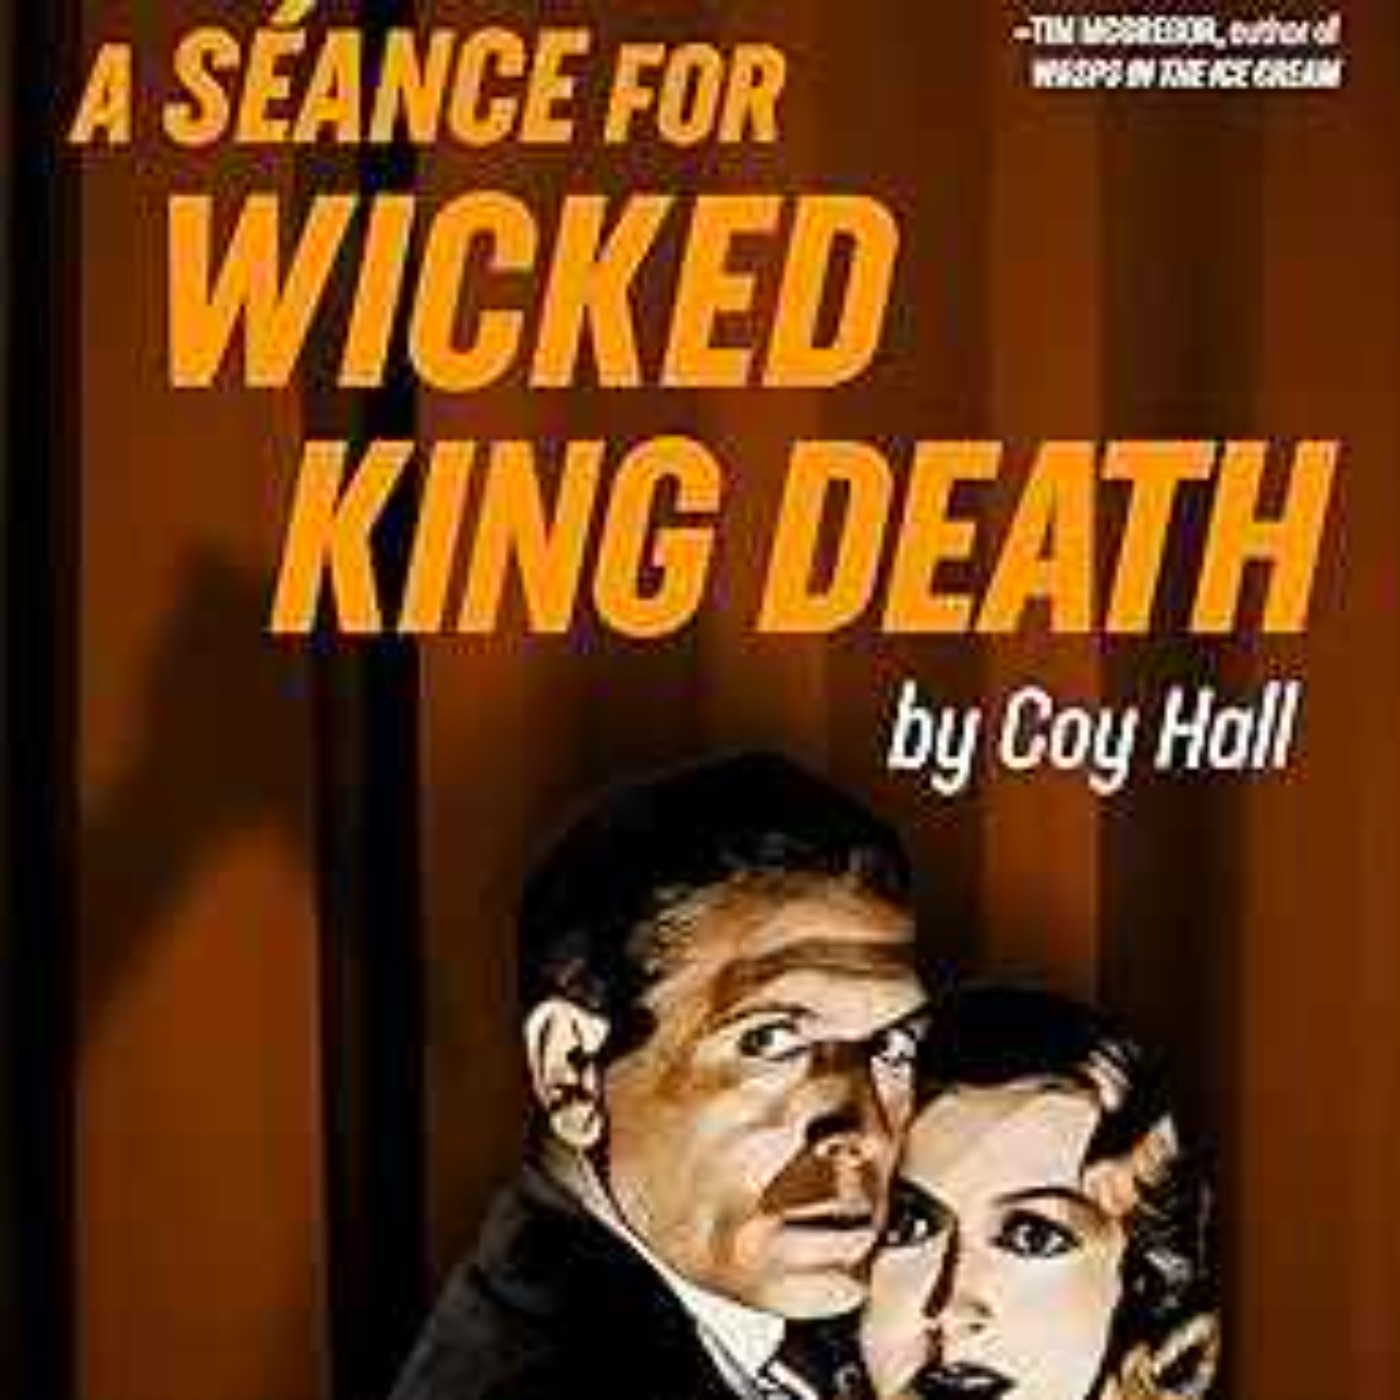 Coy Hall - A Seance for Wicked King Death